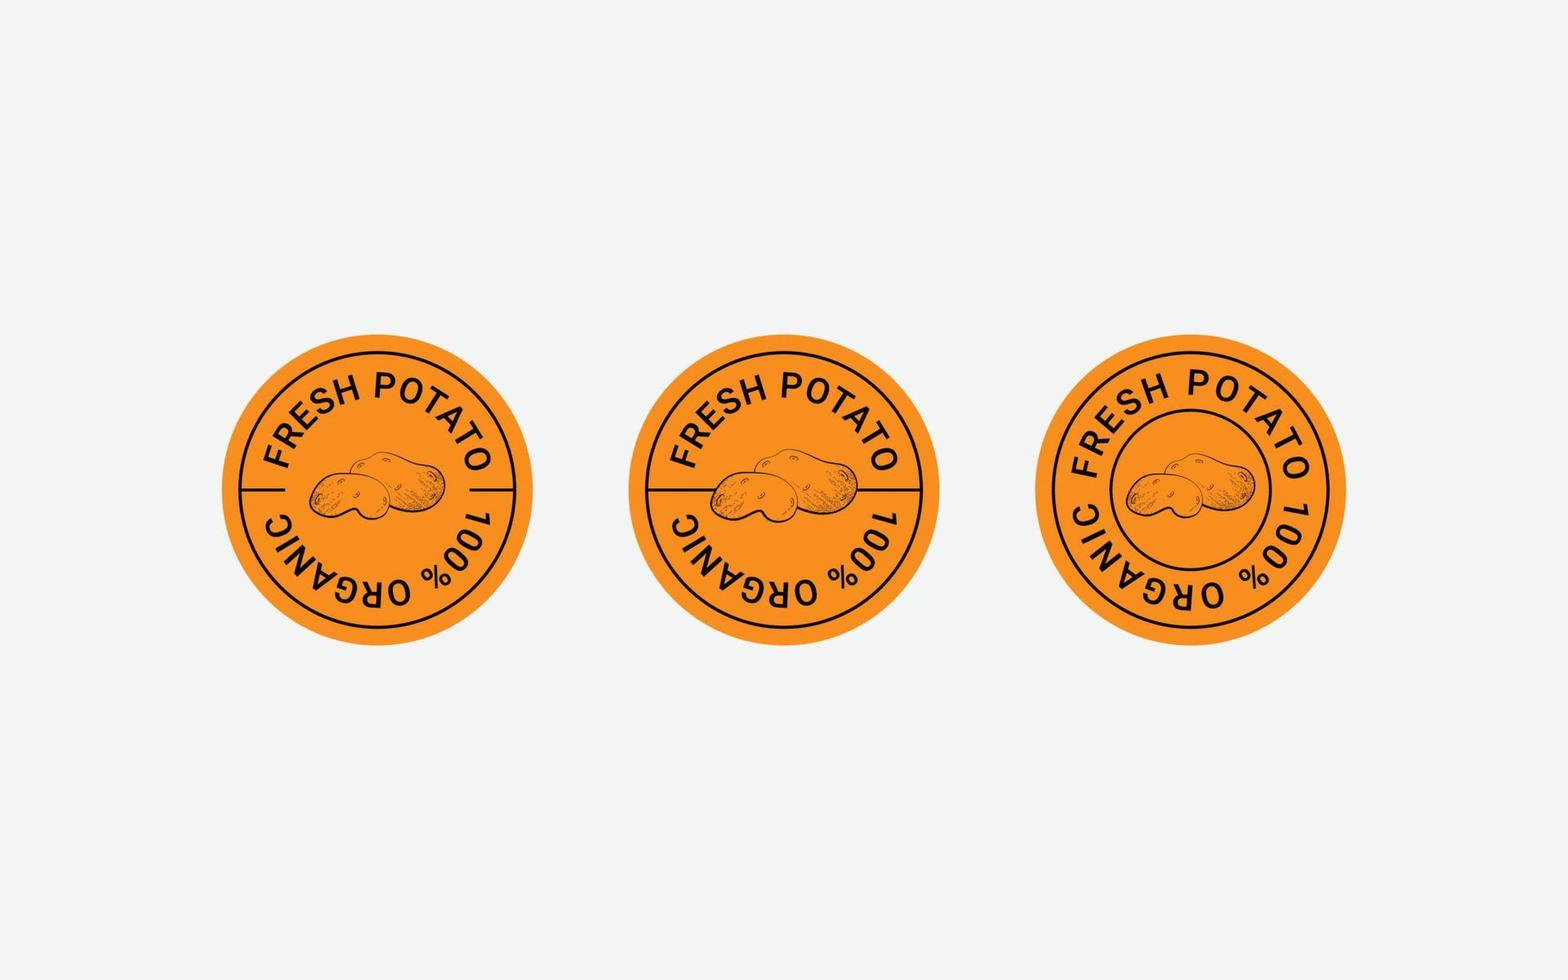 Potato stamp badge label design set. Circle form templates potato. Element for design, advertising, packaging of potato products vector